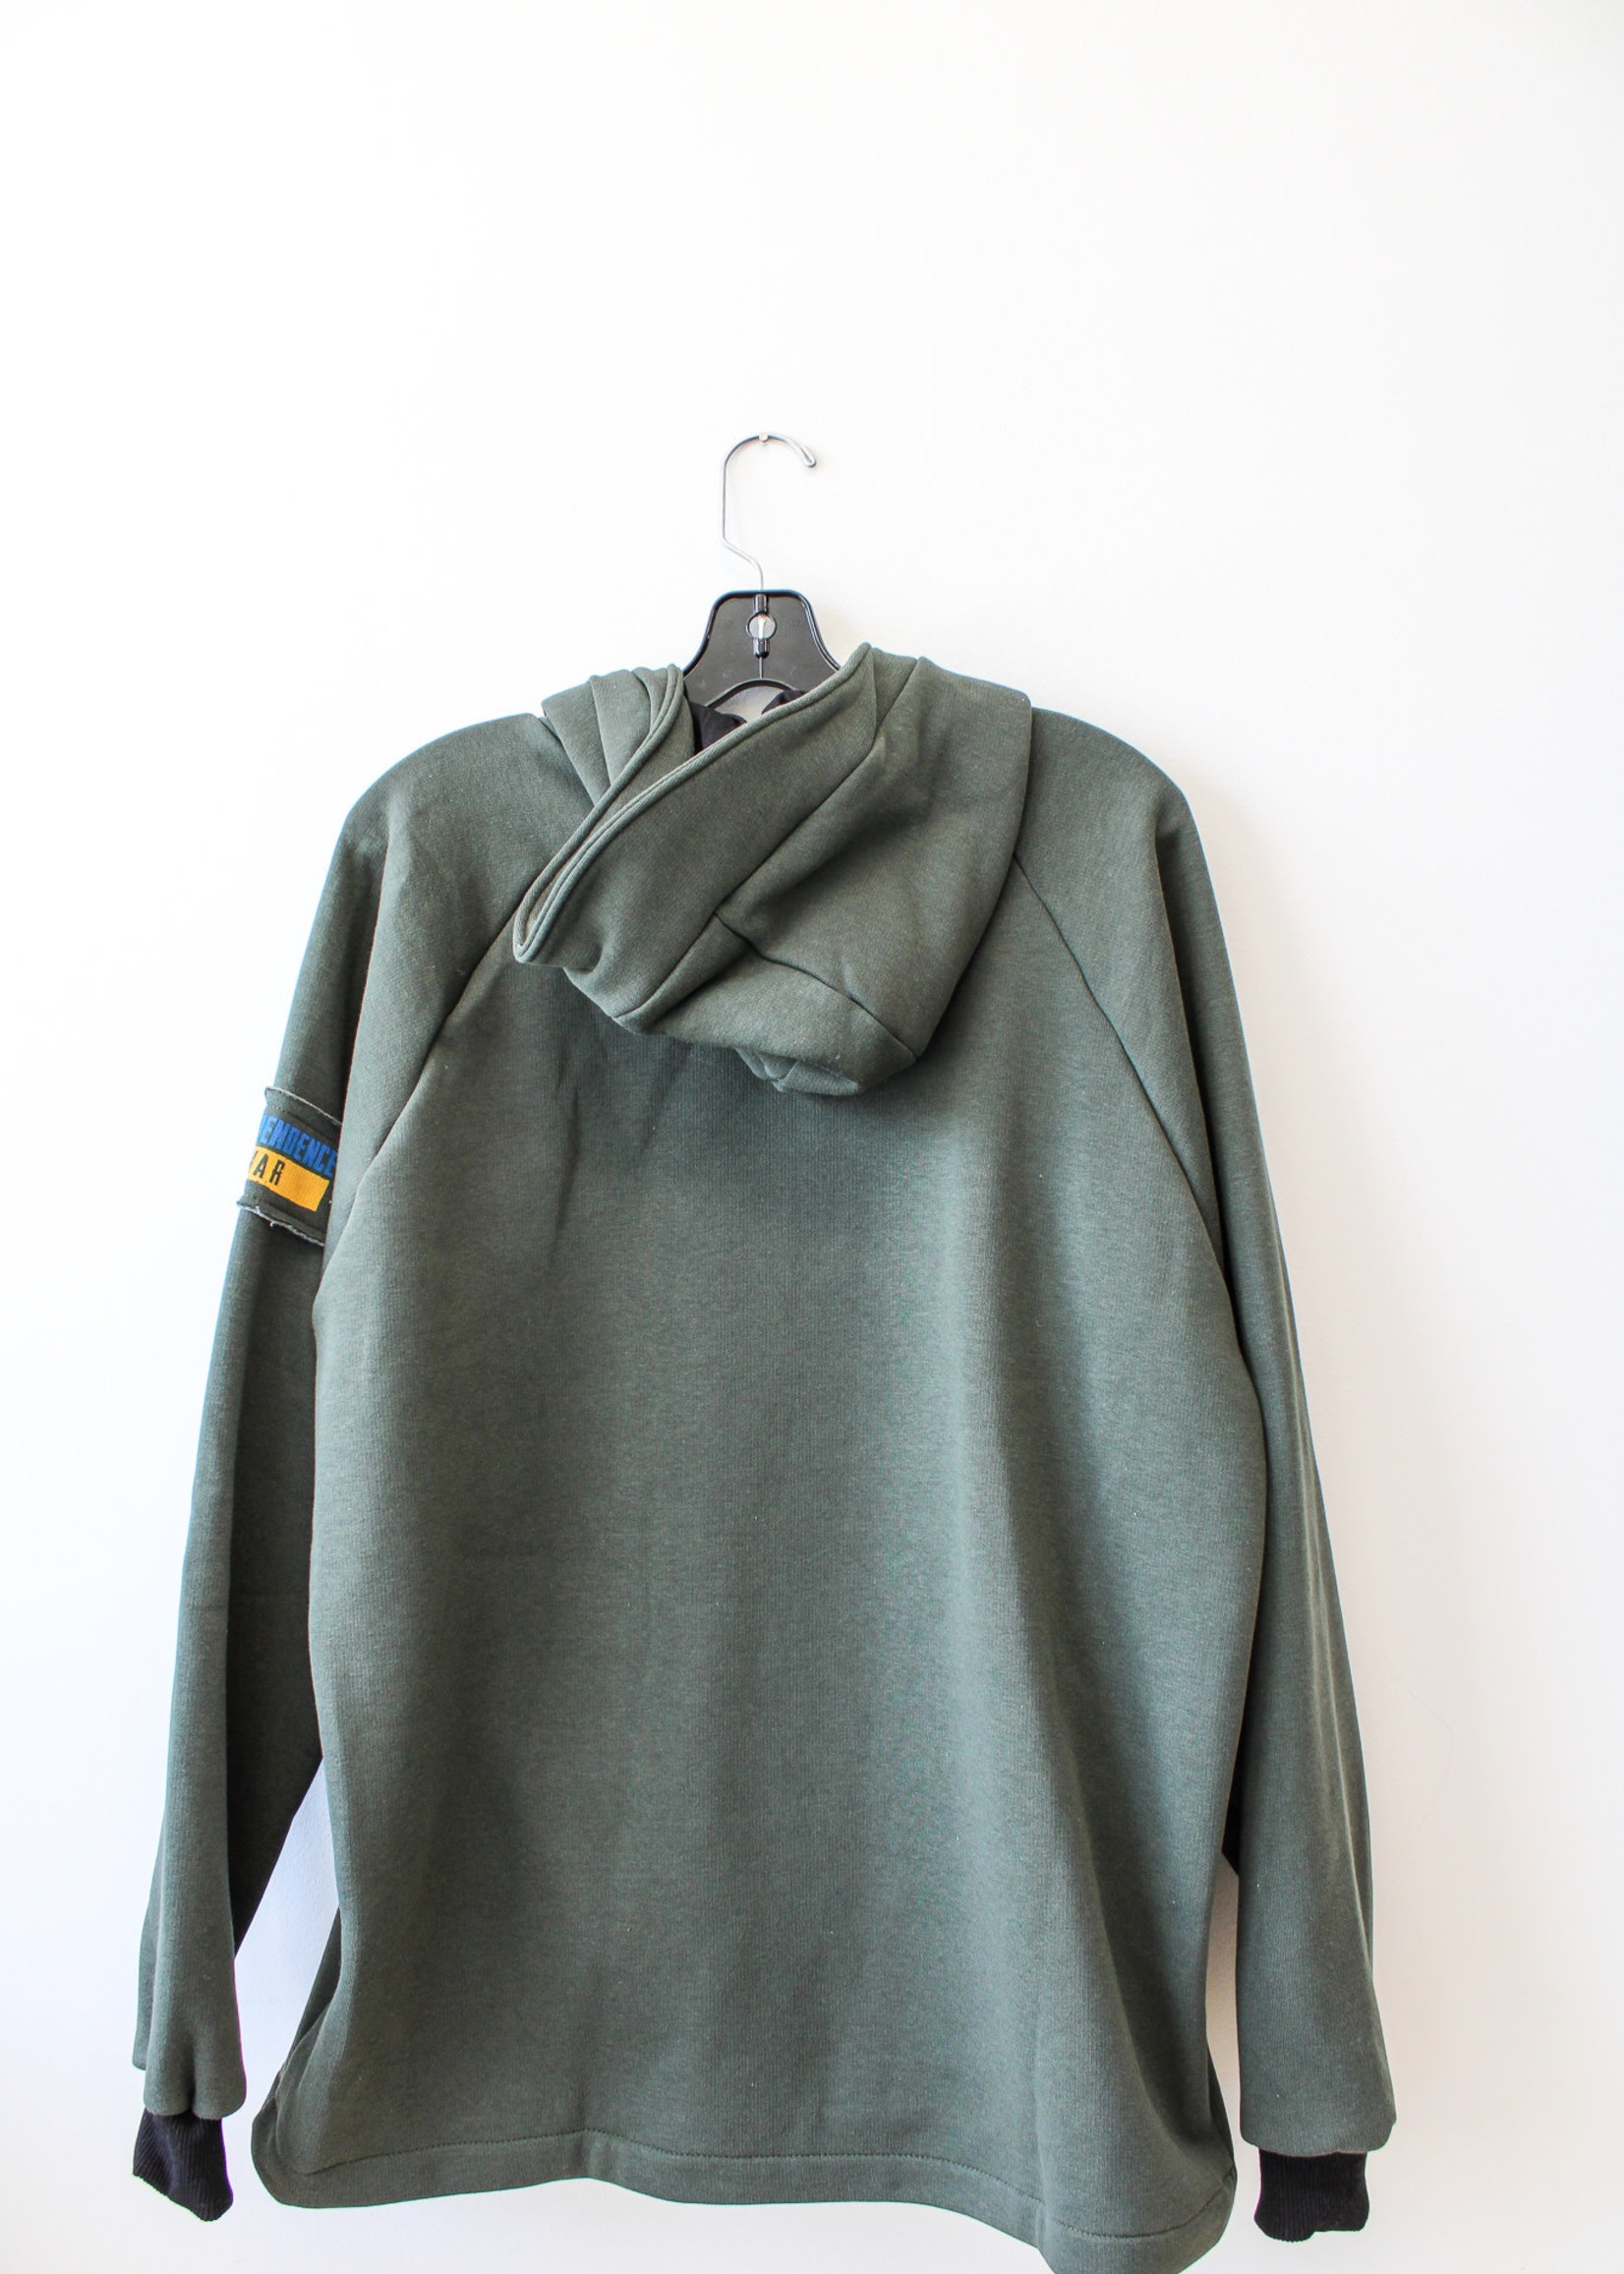 APPAREL -  (M) Hoodie Olive Green, "We are from Ukraine" XL